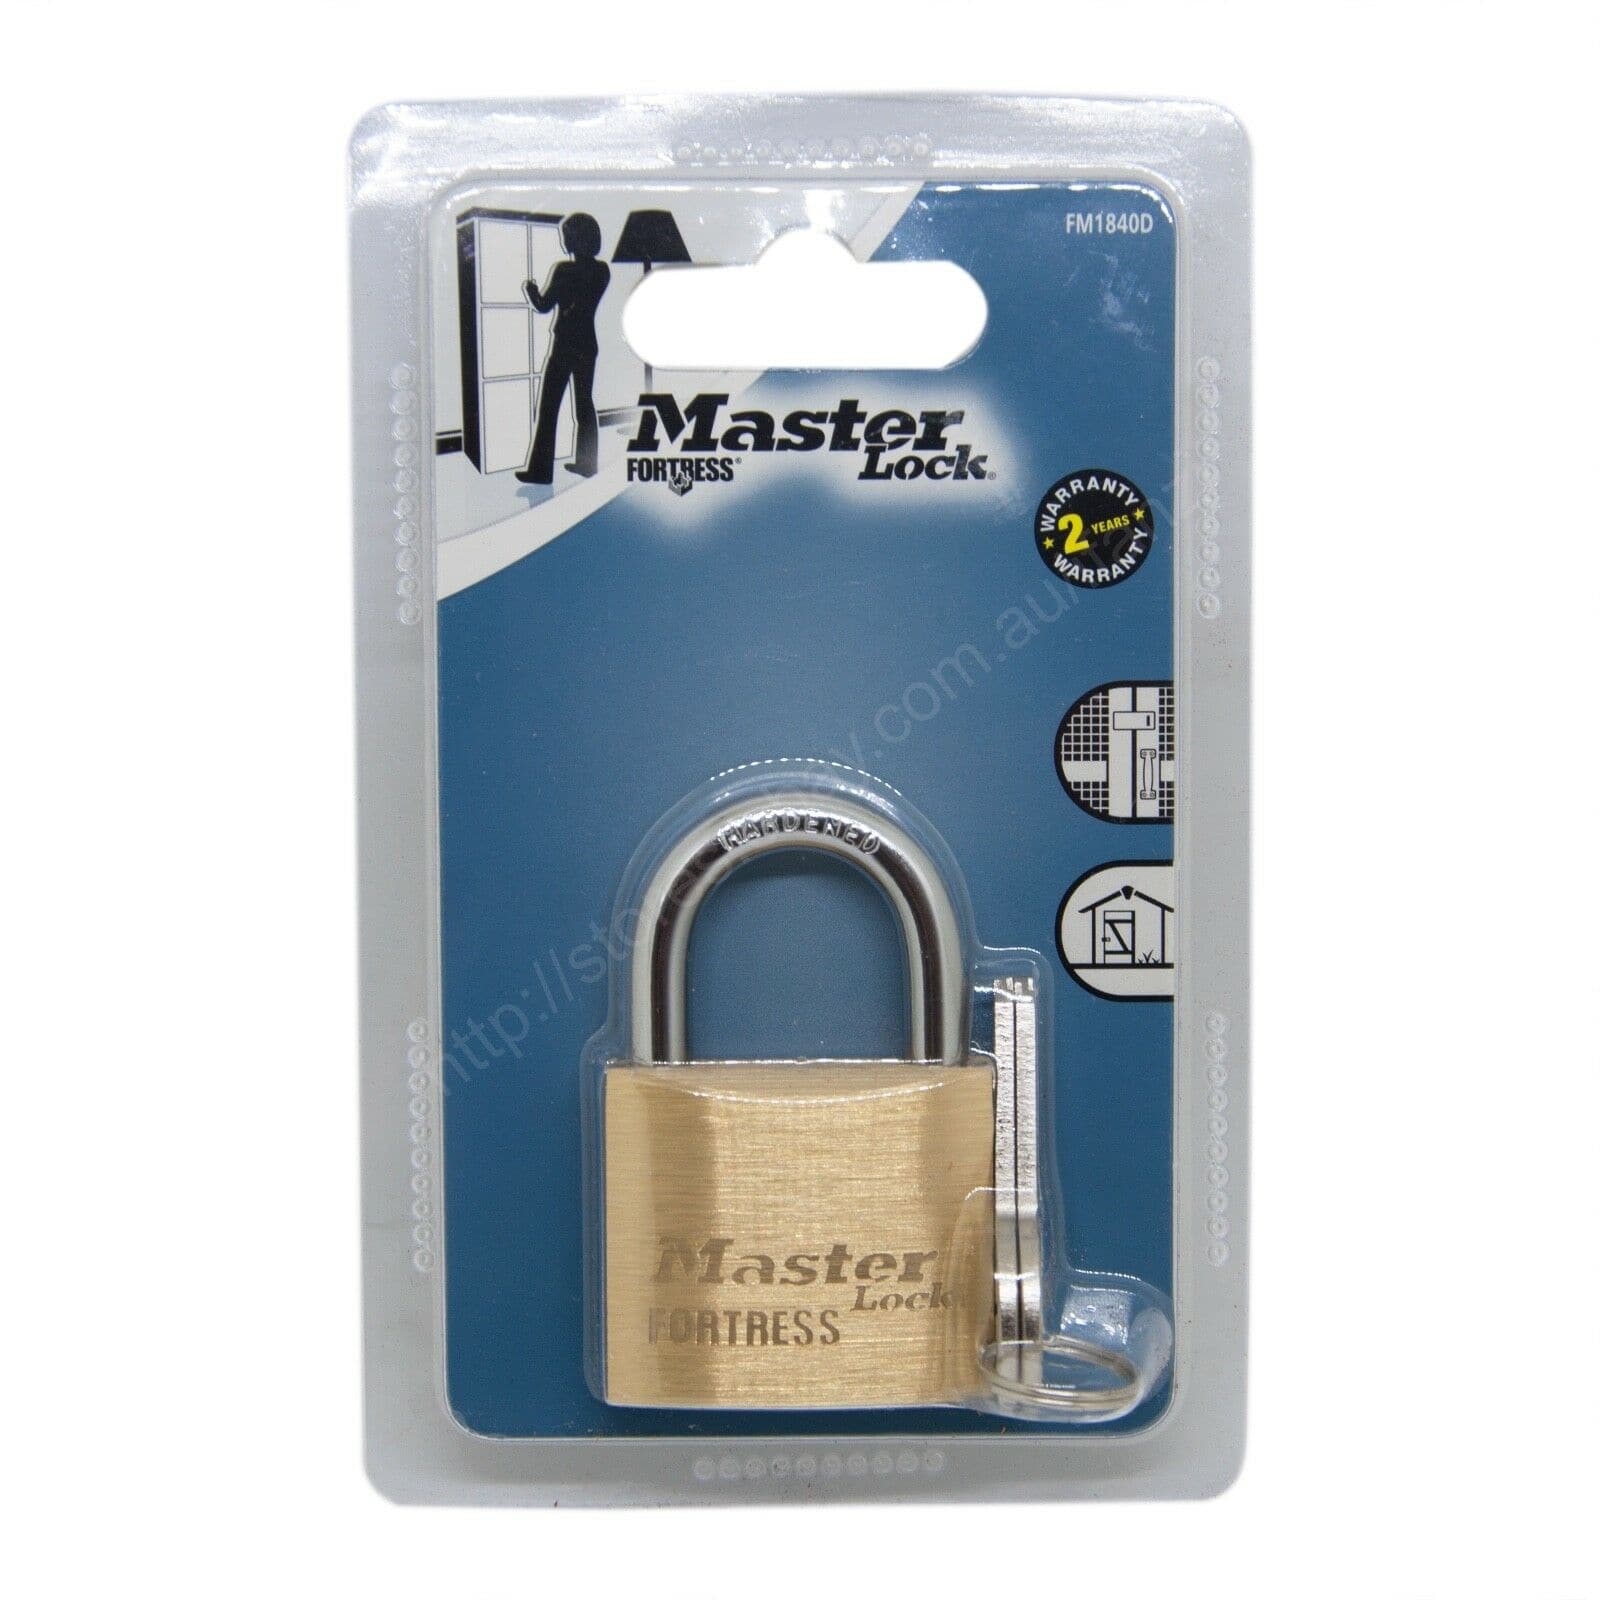 Master Lock Fortress 40mm Solid Brass Body Padlock FM1840D - Double Bay Hardware